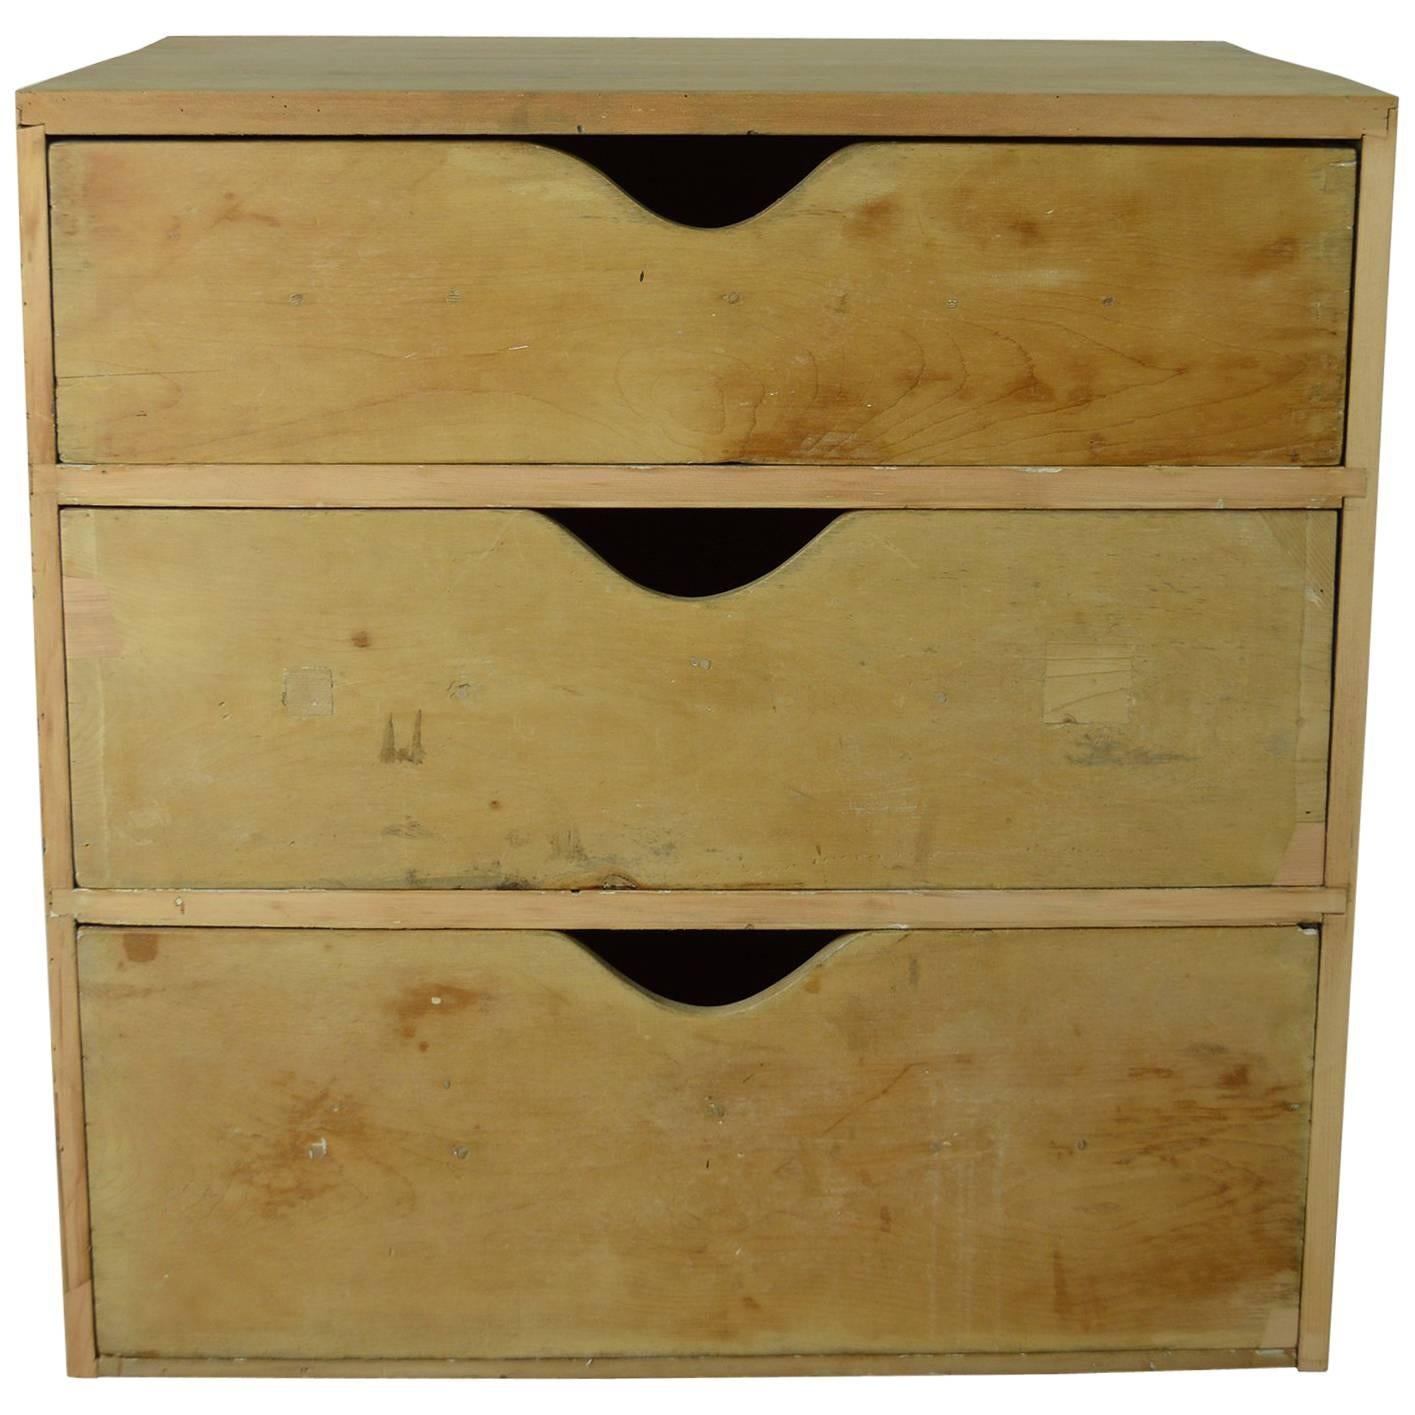 Antique Minimalist Style Pine Chest of Drawers, English, 19th Century